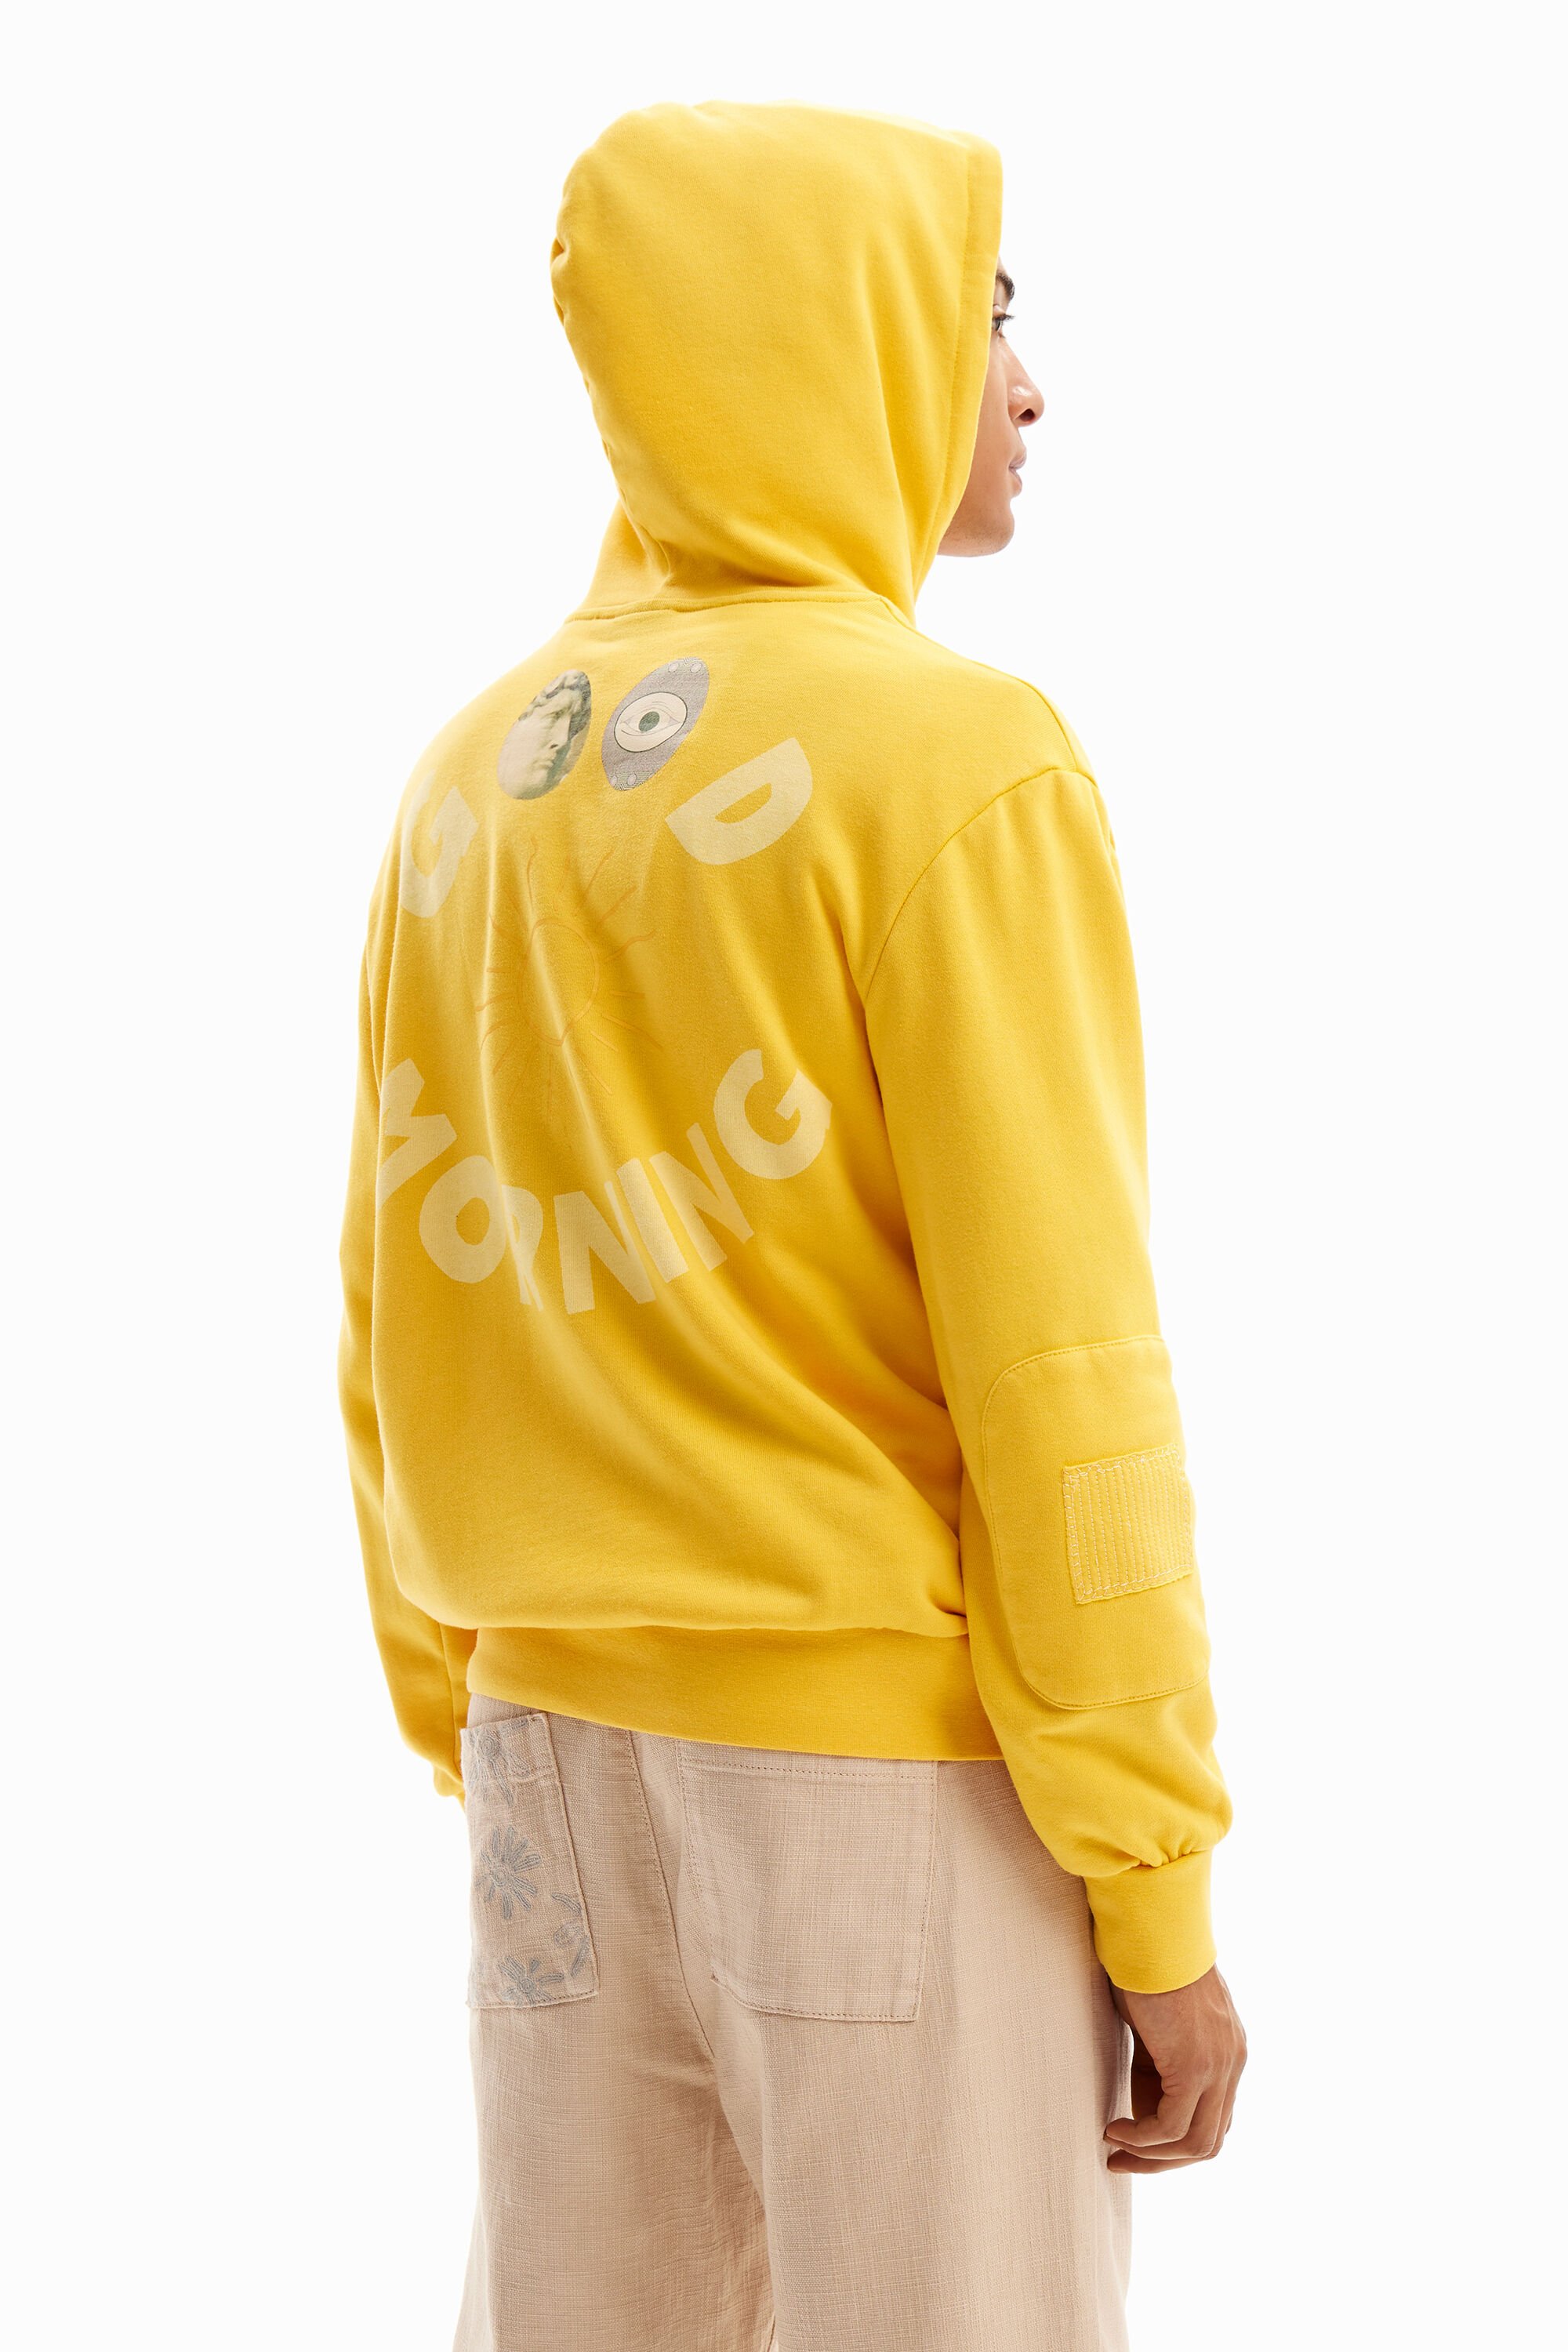 Patchwork message hoodie - YELLOW - M